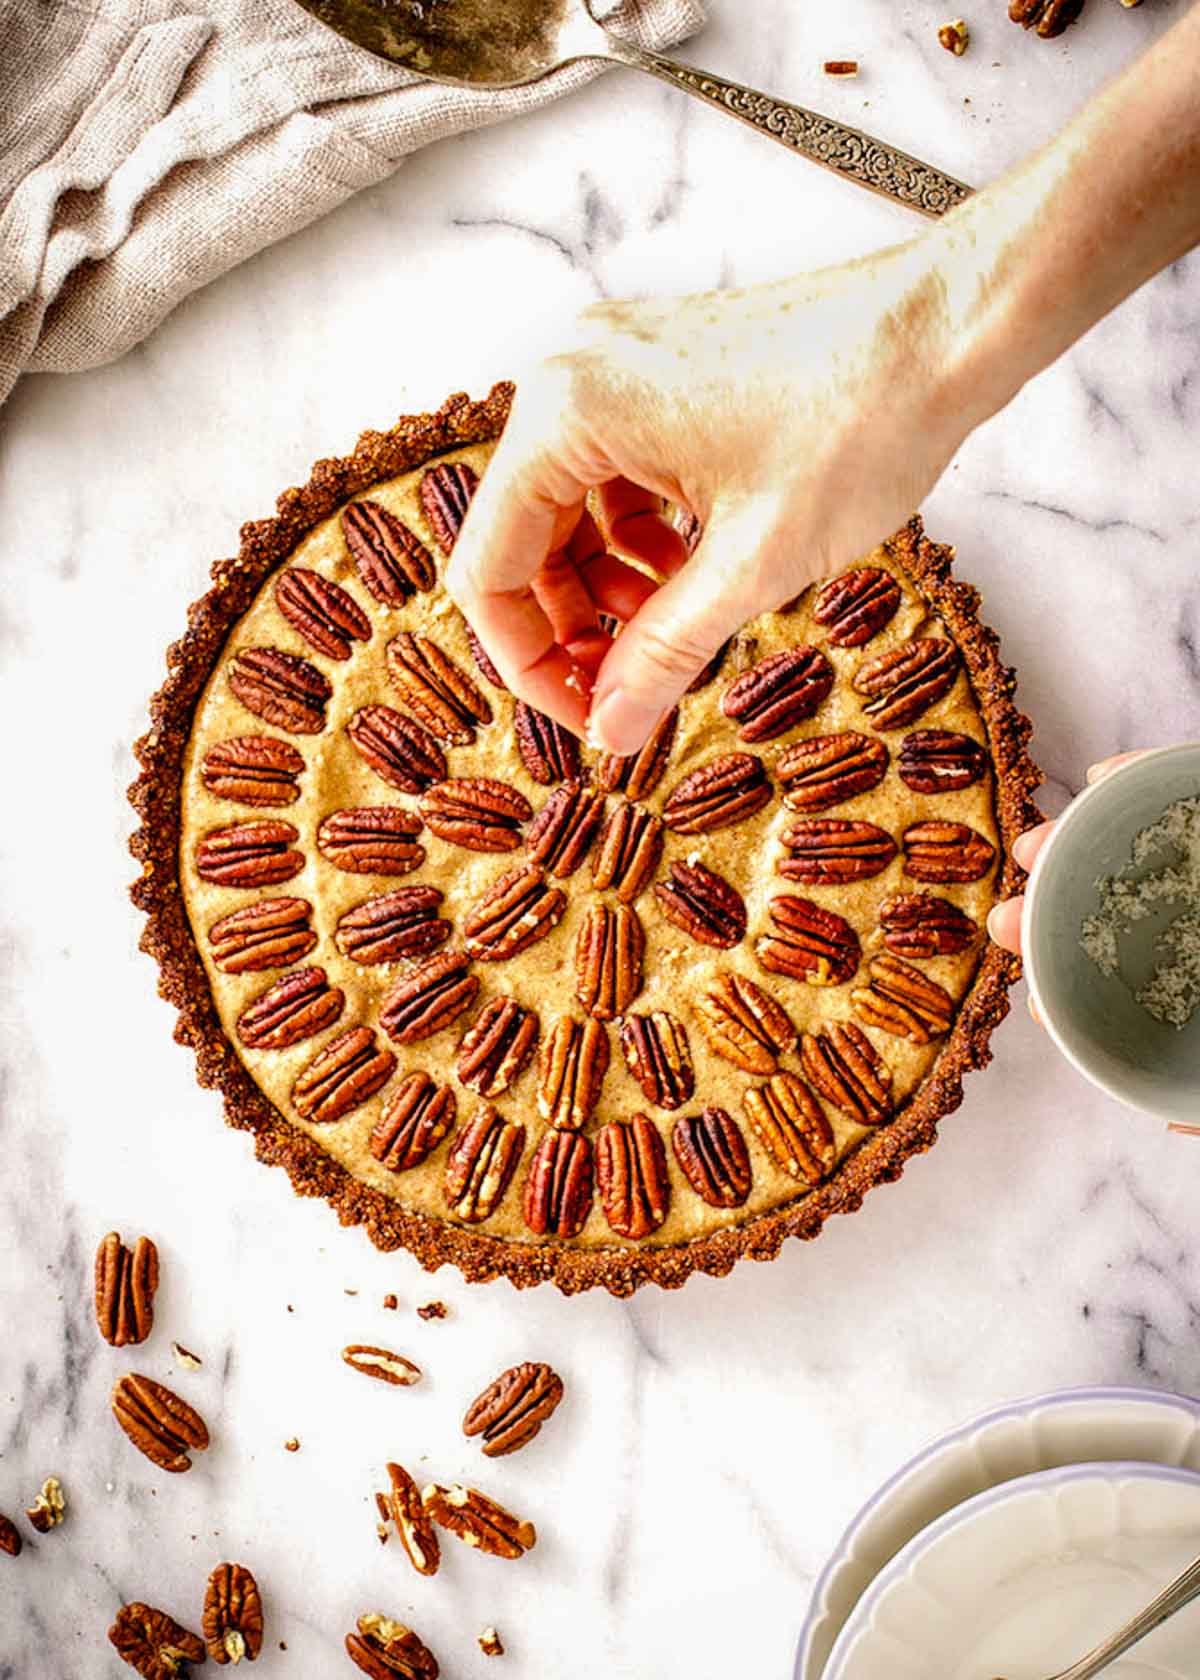 Round gluten free vegan pecan pie decorated with pecans in concentric circles, sitting on a marble background. A woman's hand is sprinkling sea salt over it.